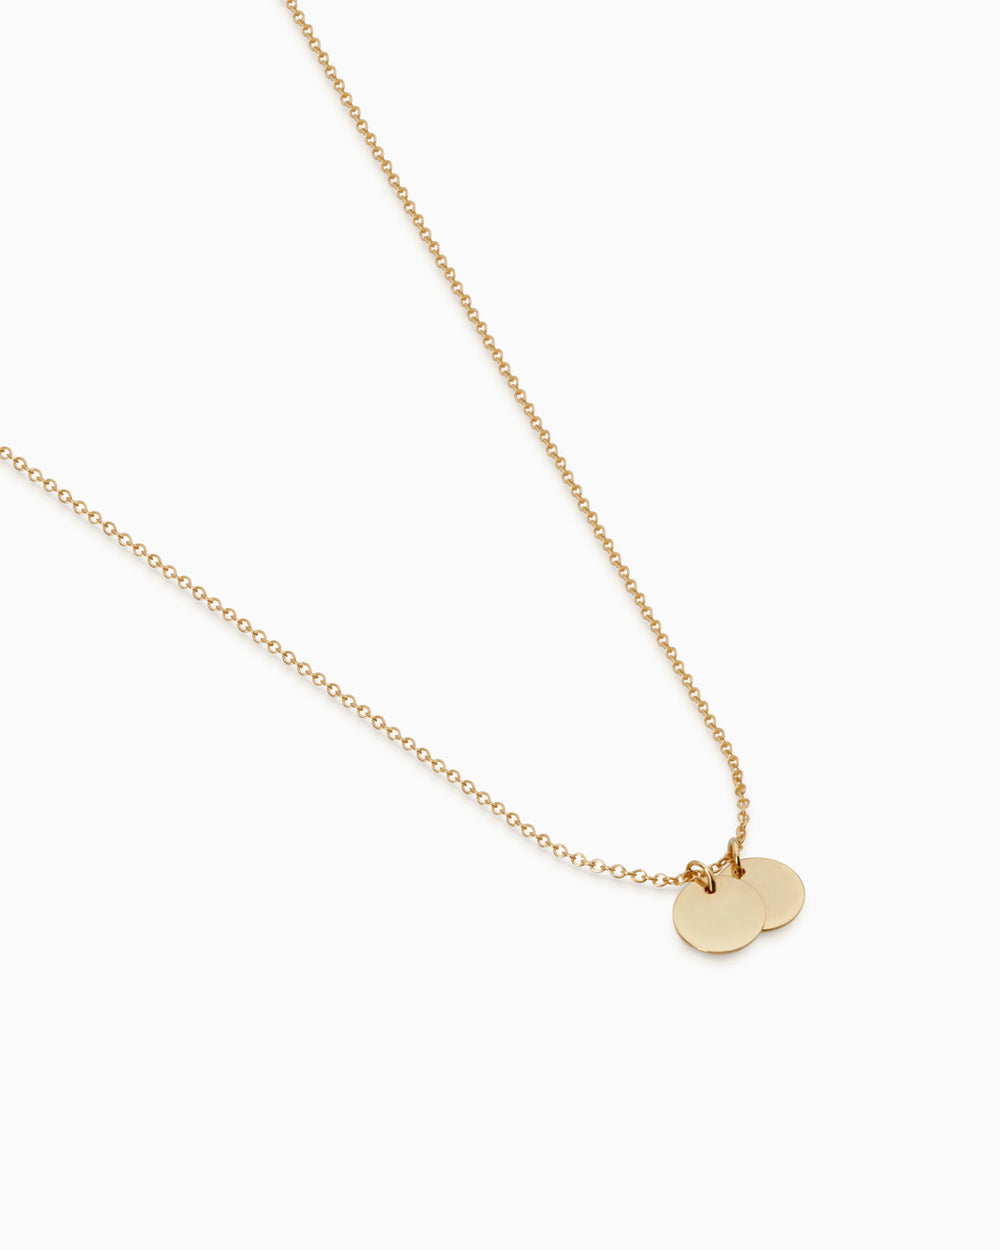 Disc Necklace | Solid Yellow Gold